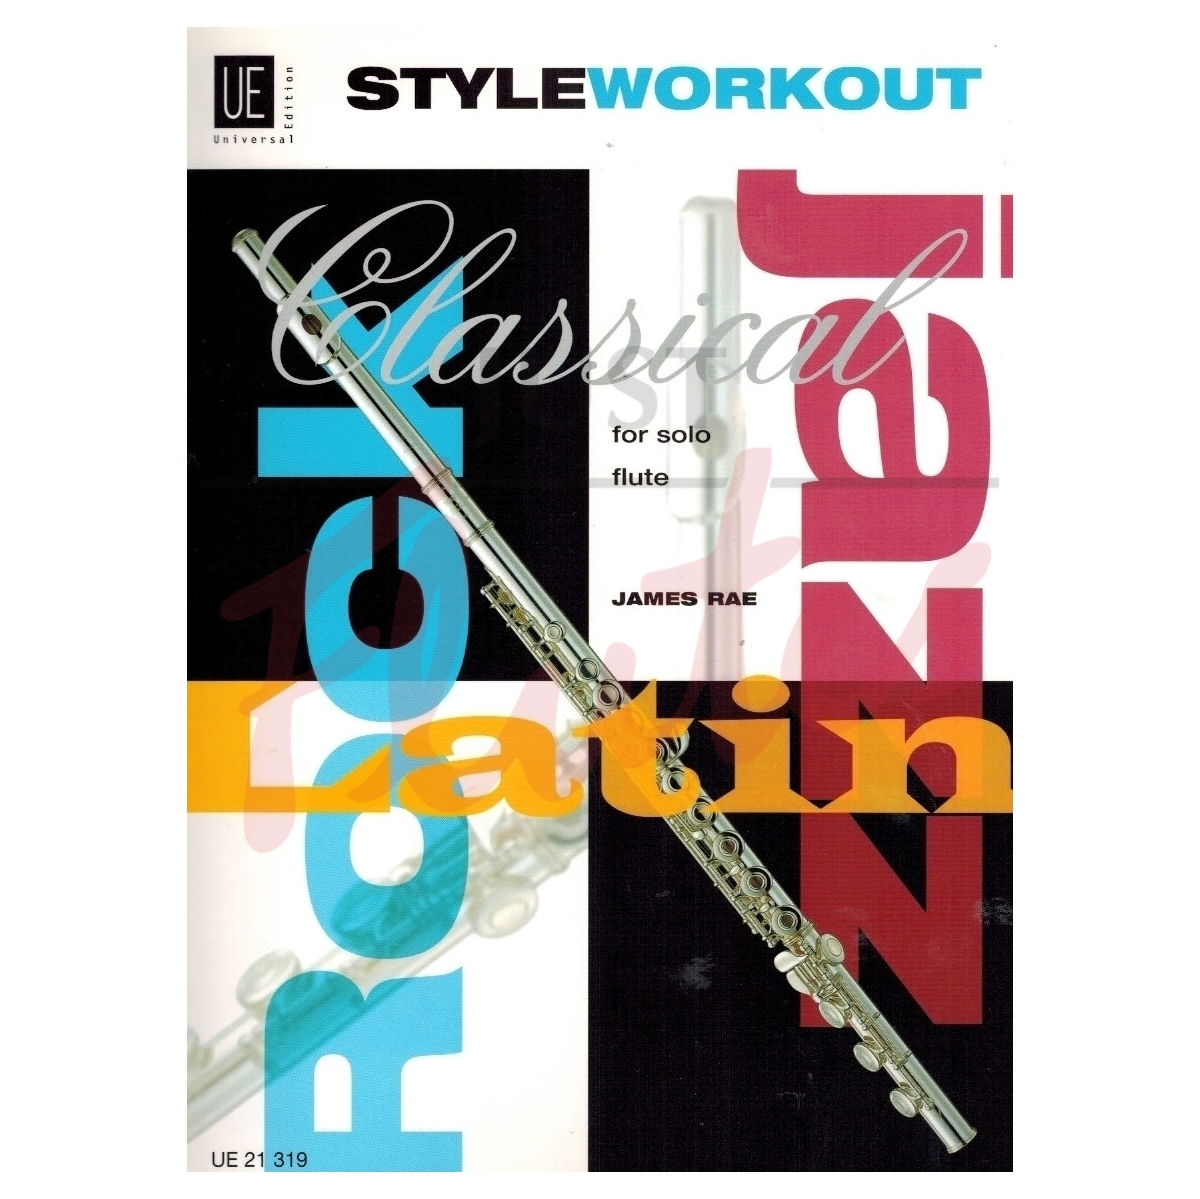 Style Workout for Flute